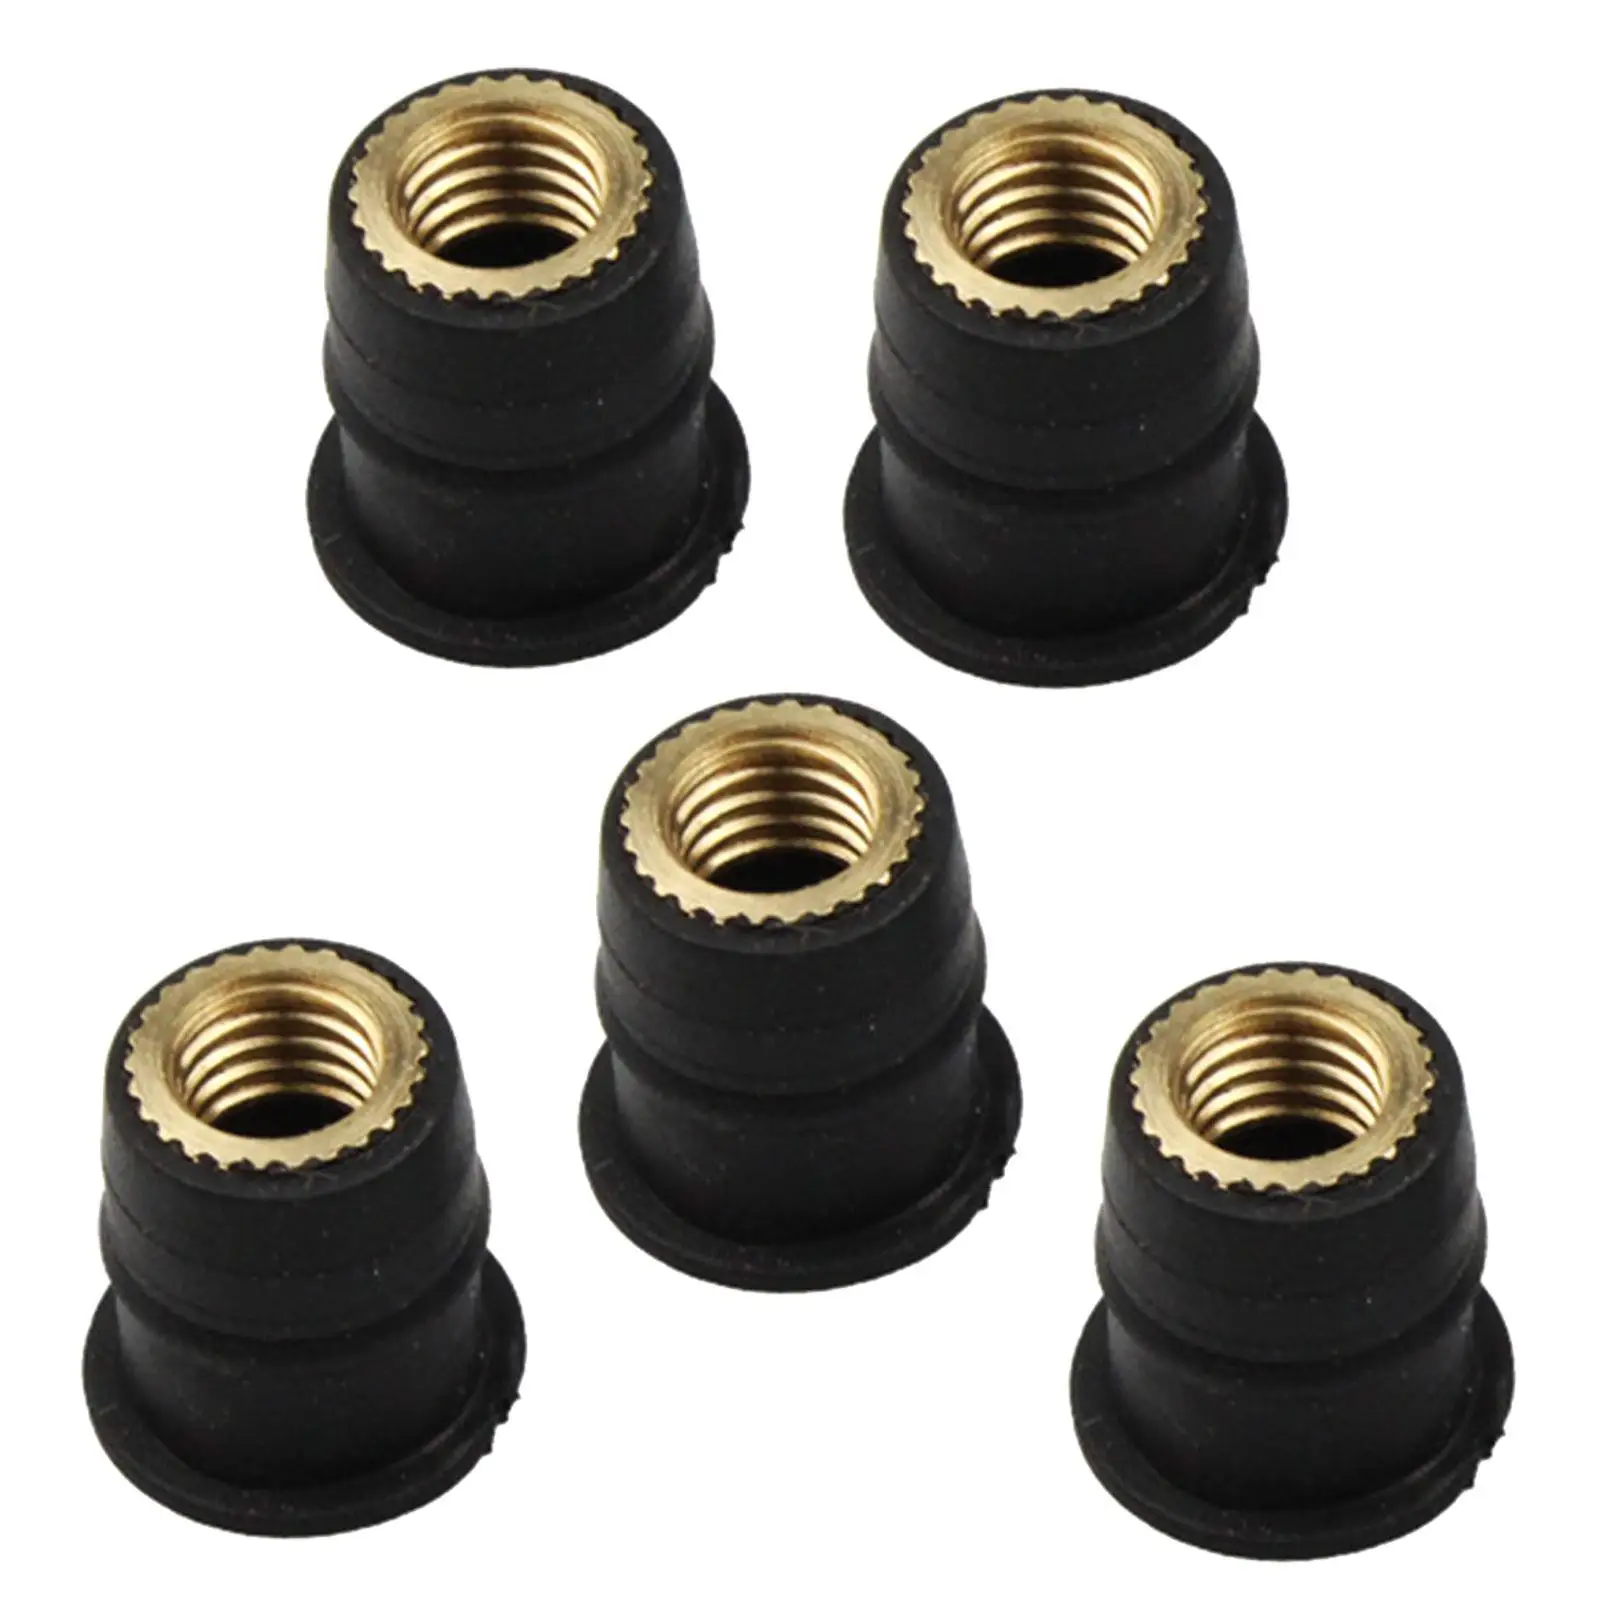 5x Windshield Rubber Well Nut Parts Motorcycle Fastener for Kayak Canoe